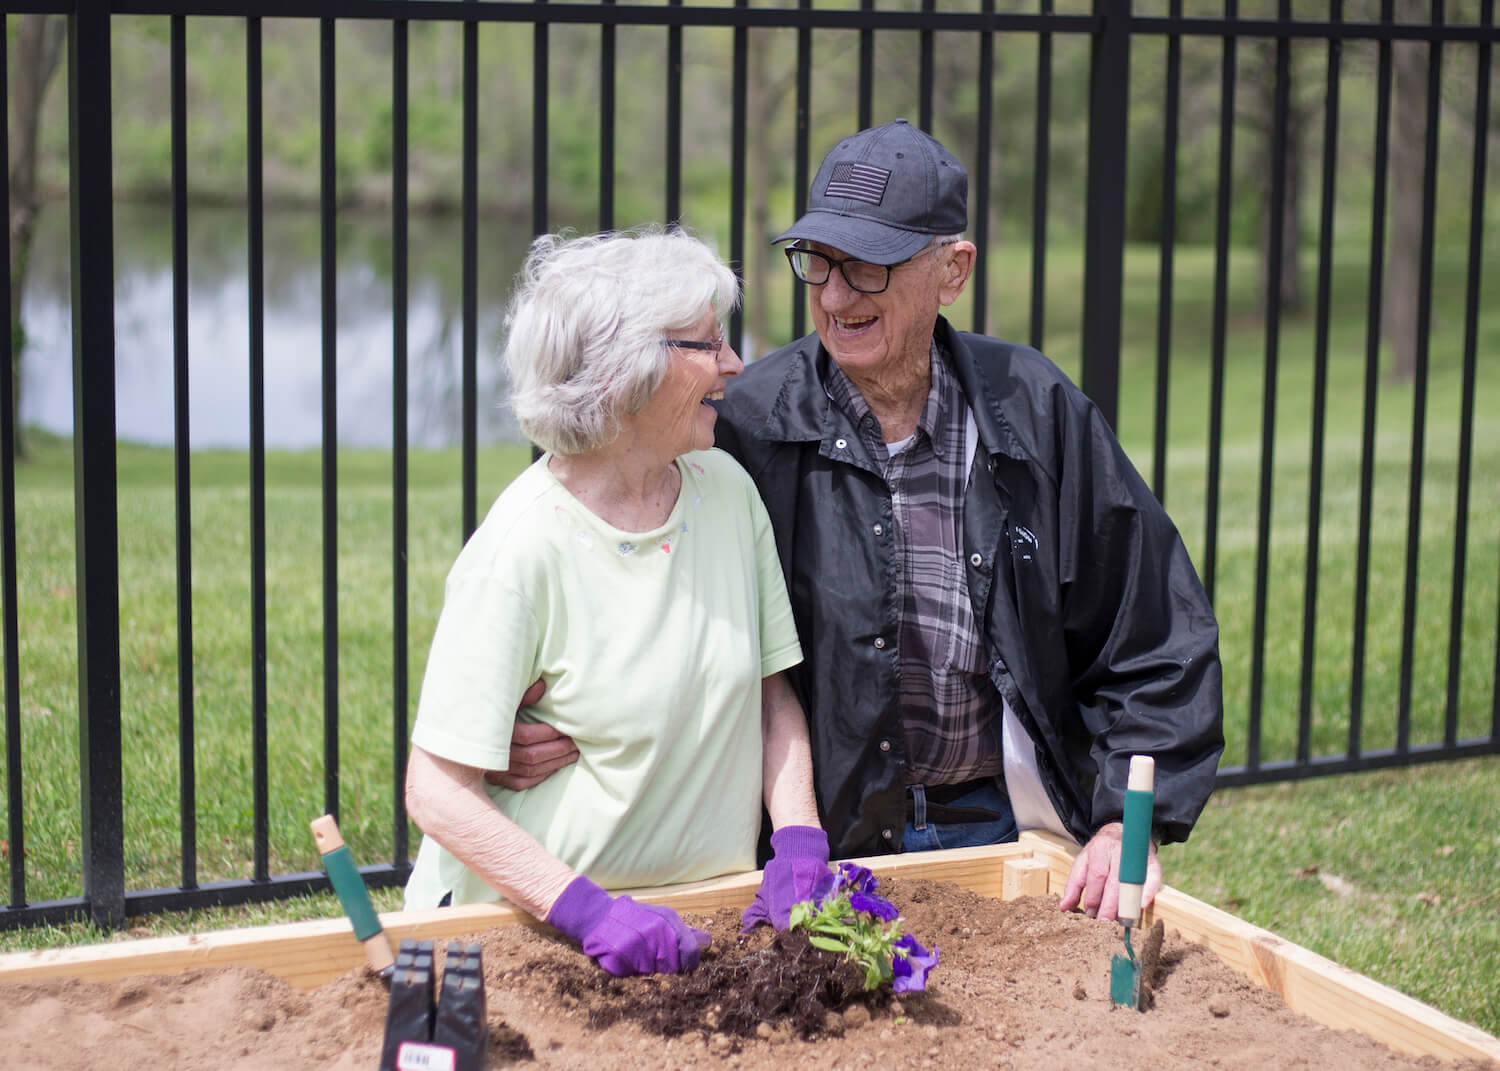 Resident couple gardening together